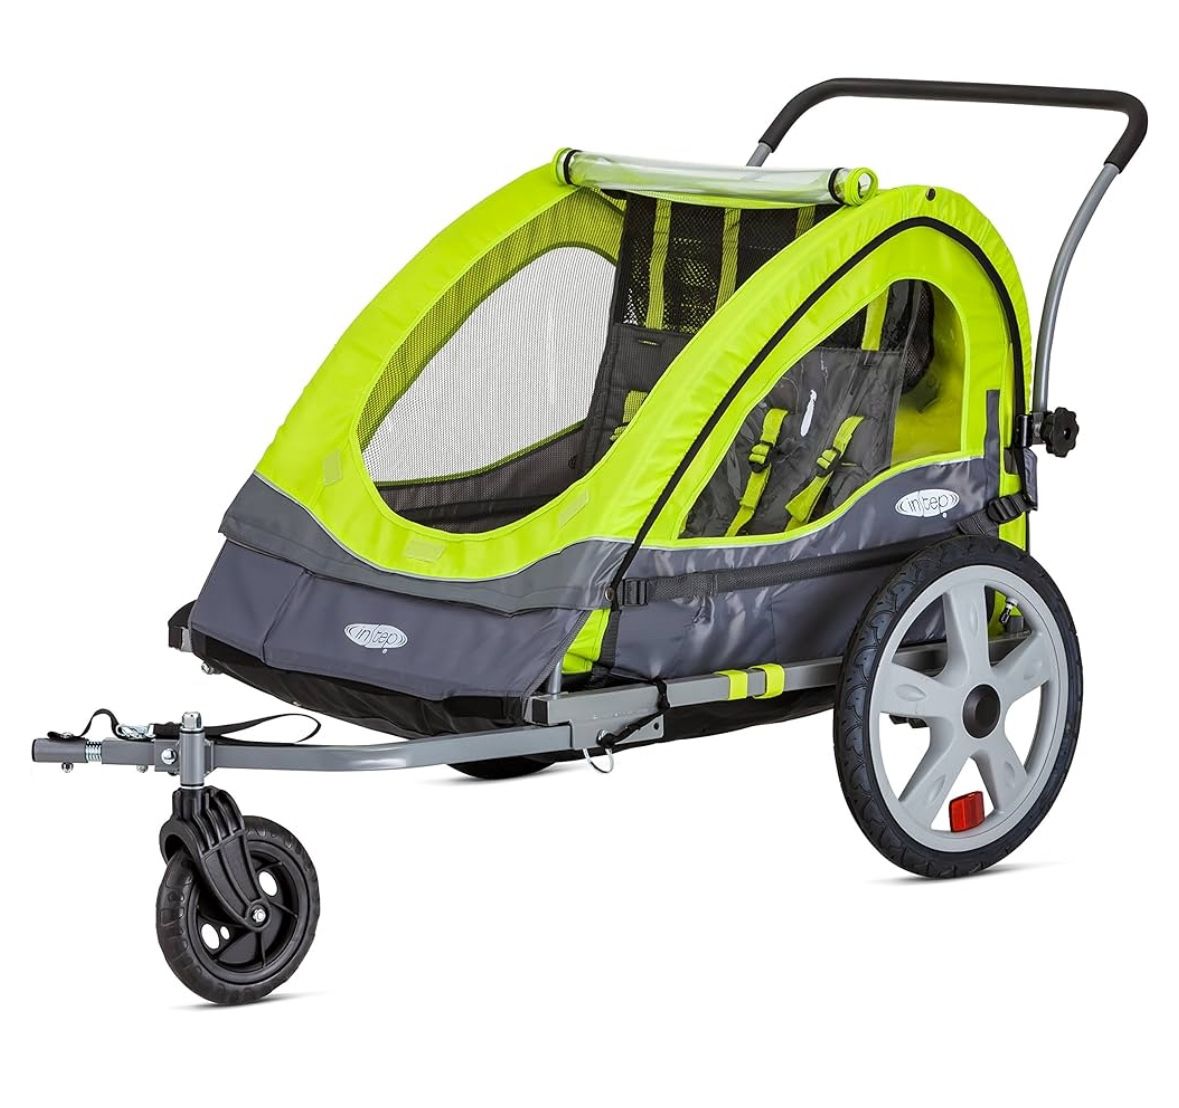 Instep Quick-N-EZ Double Tow Behind Bike Trailer for Toddlers